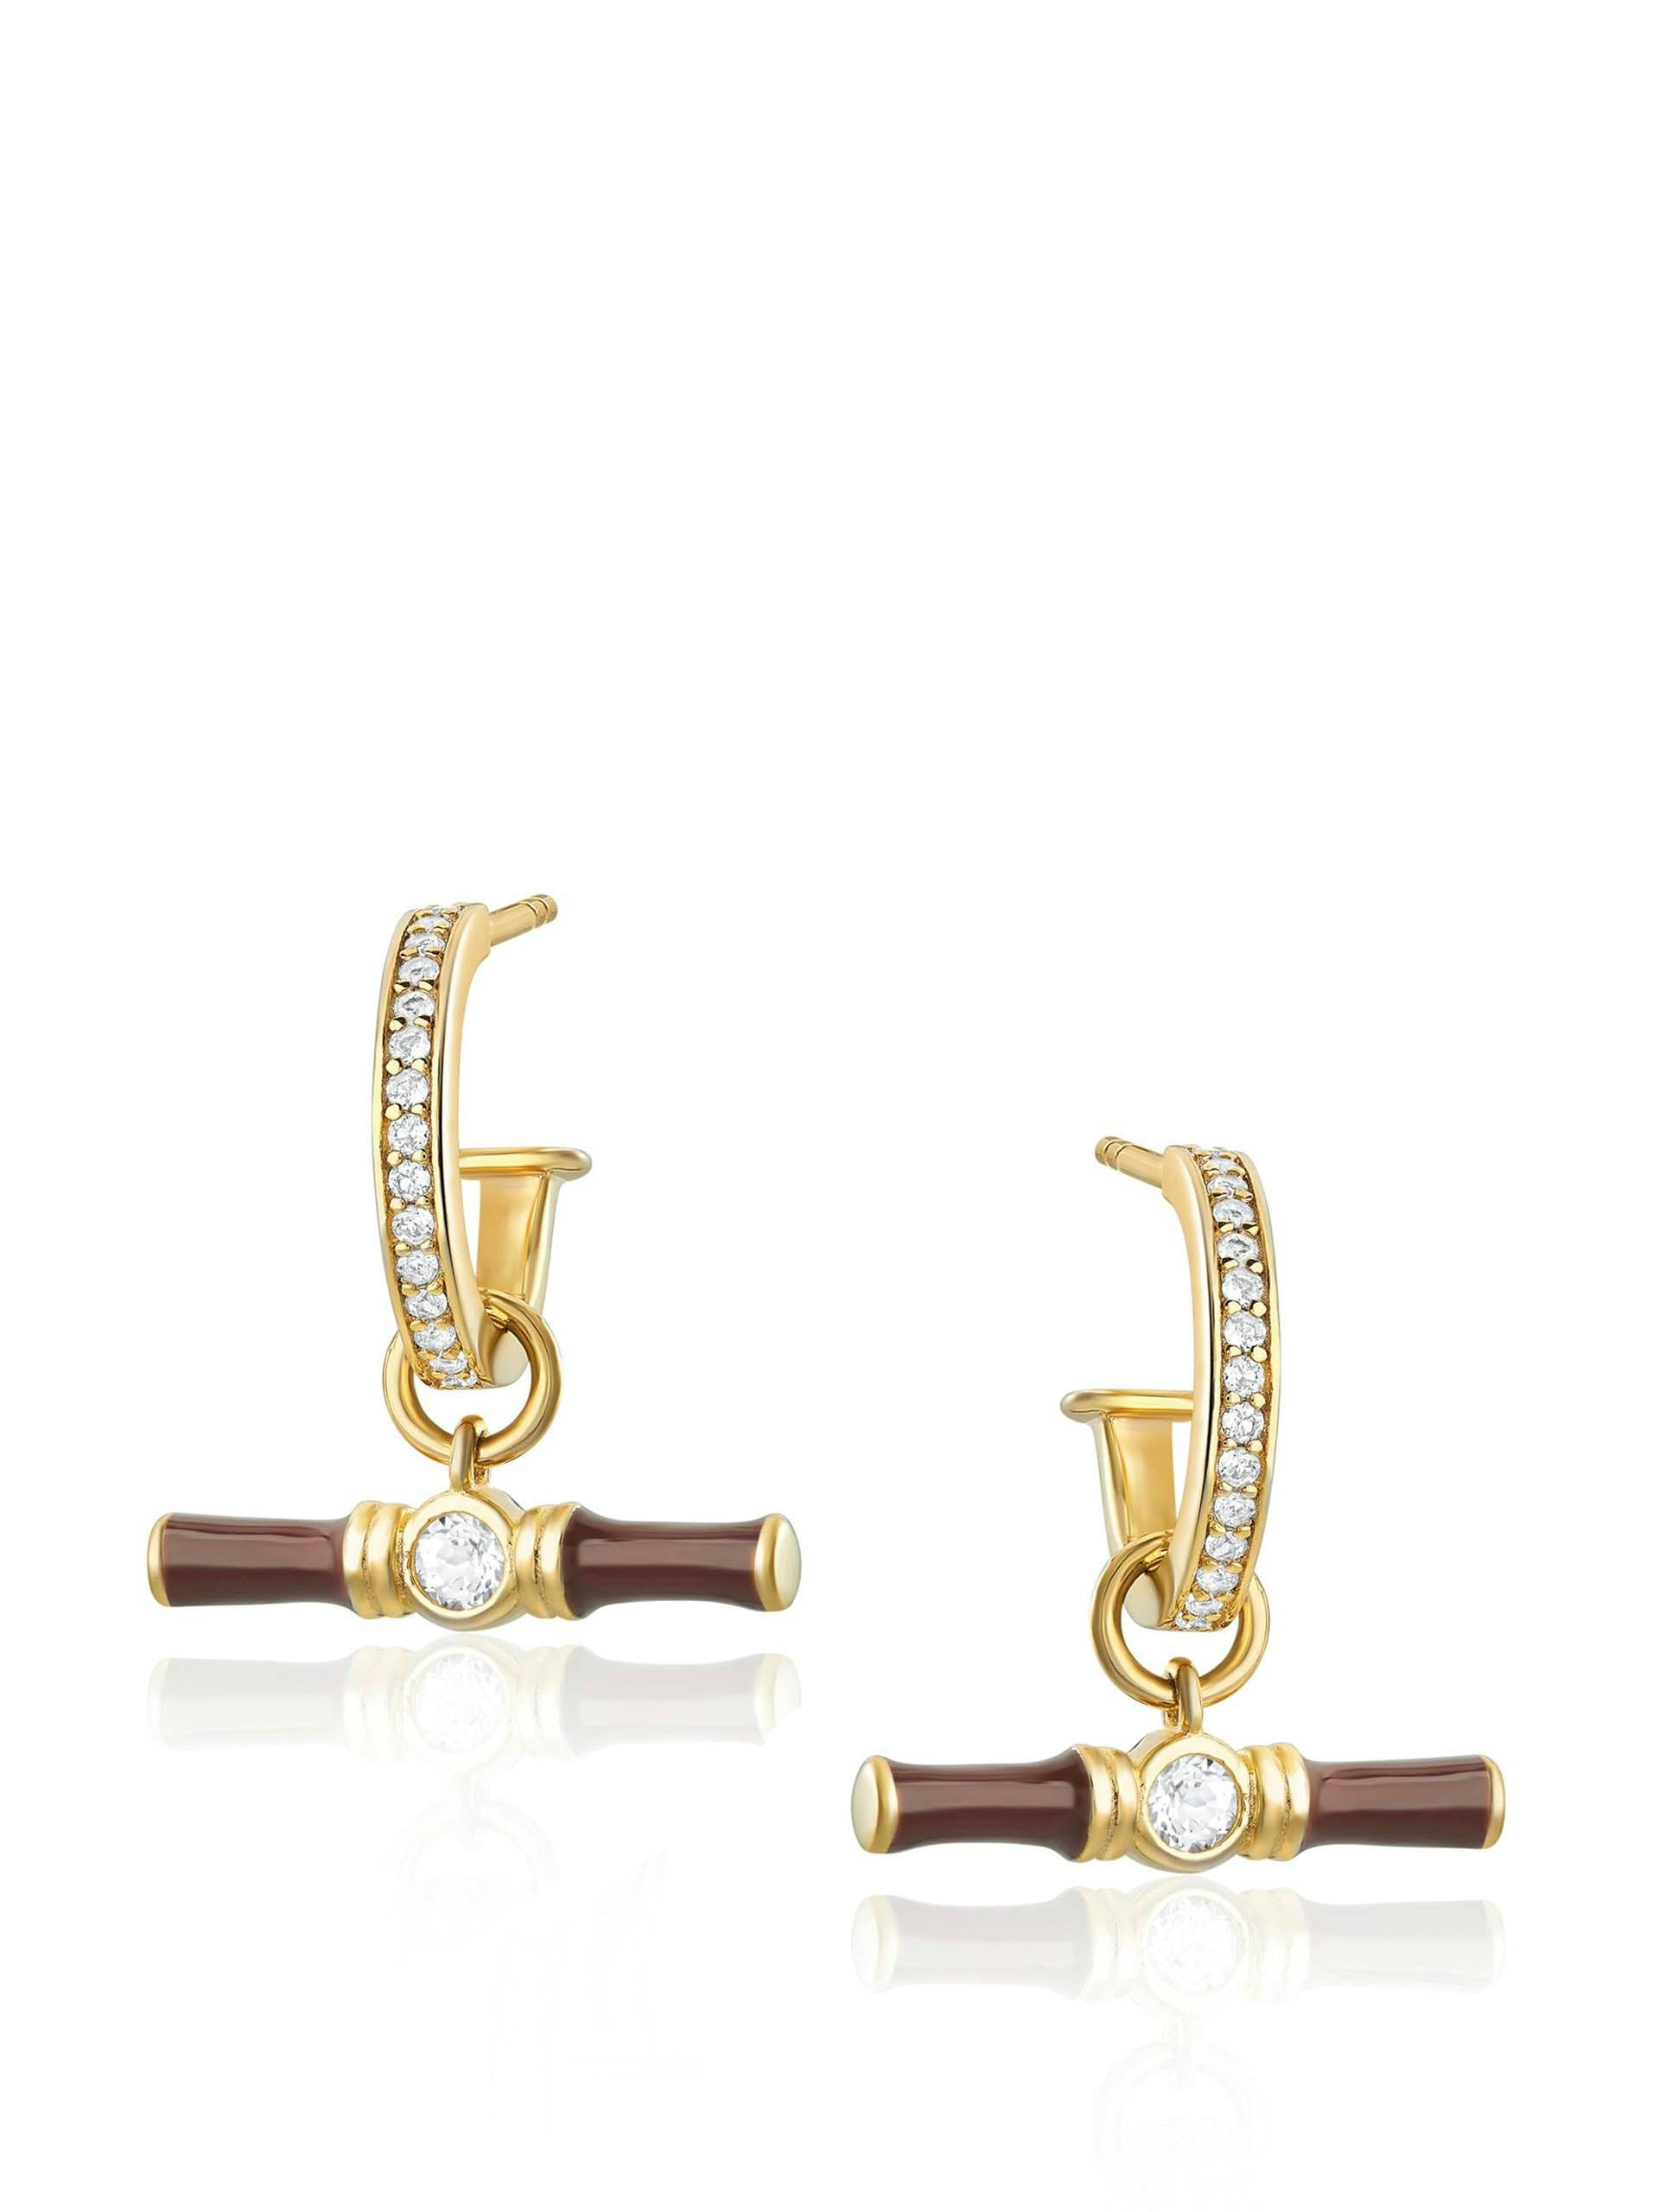 White topaz and gold hoop earrings with brown enamel t-bar charm